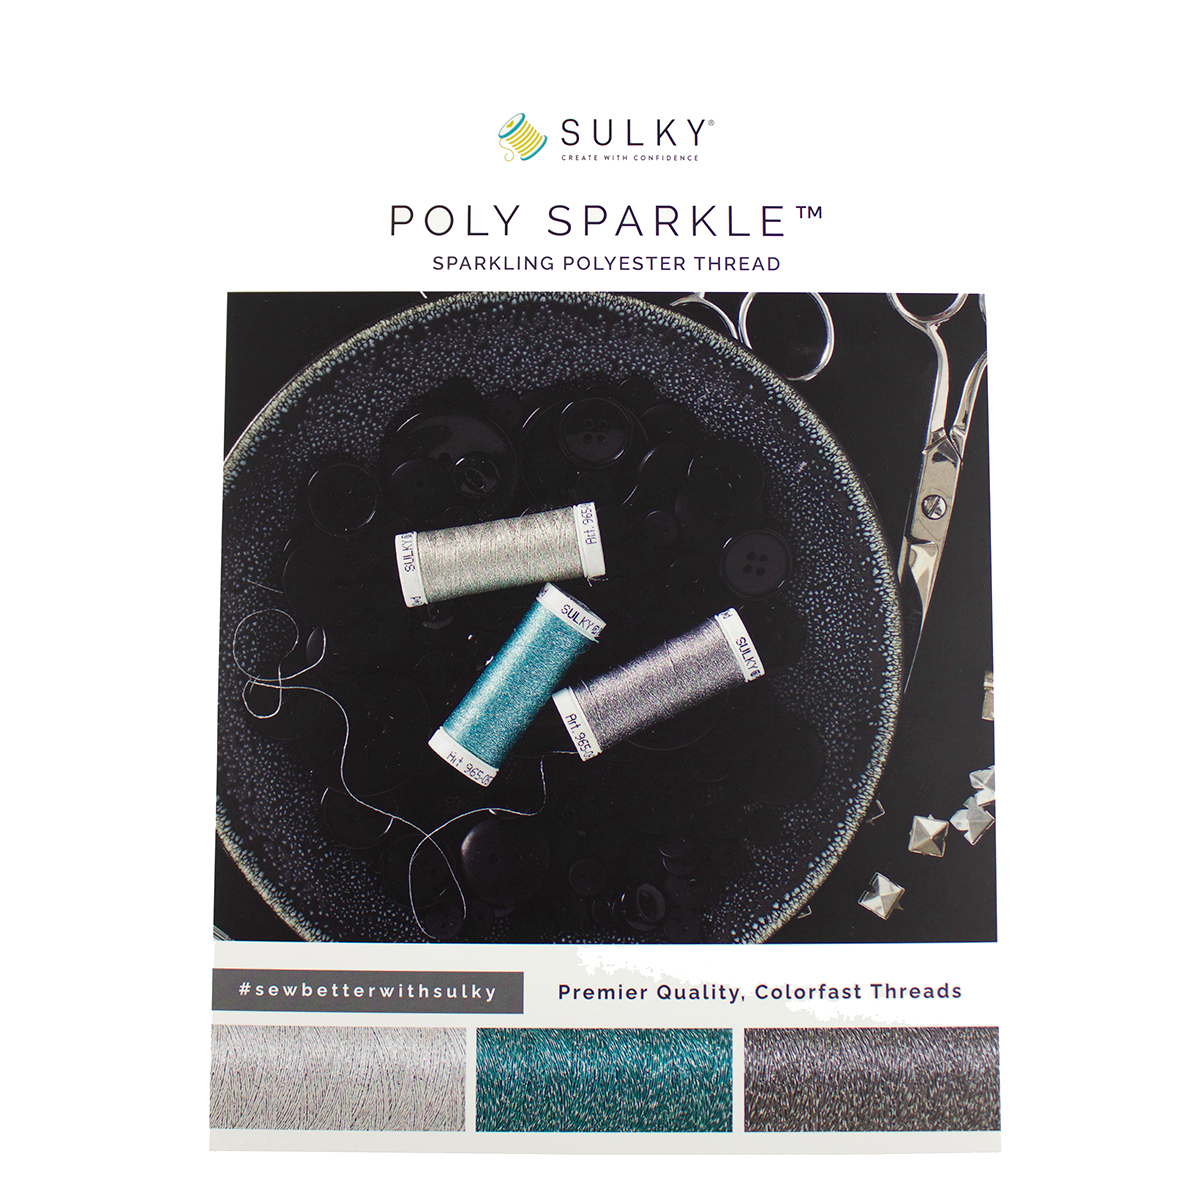 Sulky Poly Sparkle Real Thread Color Card Questions & Answers